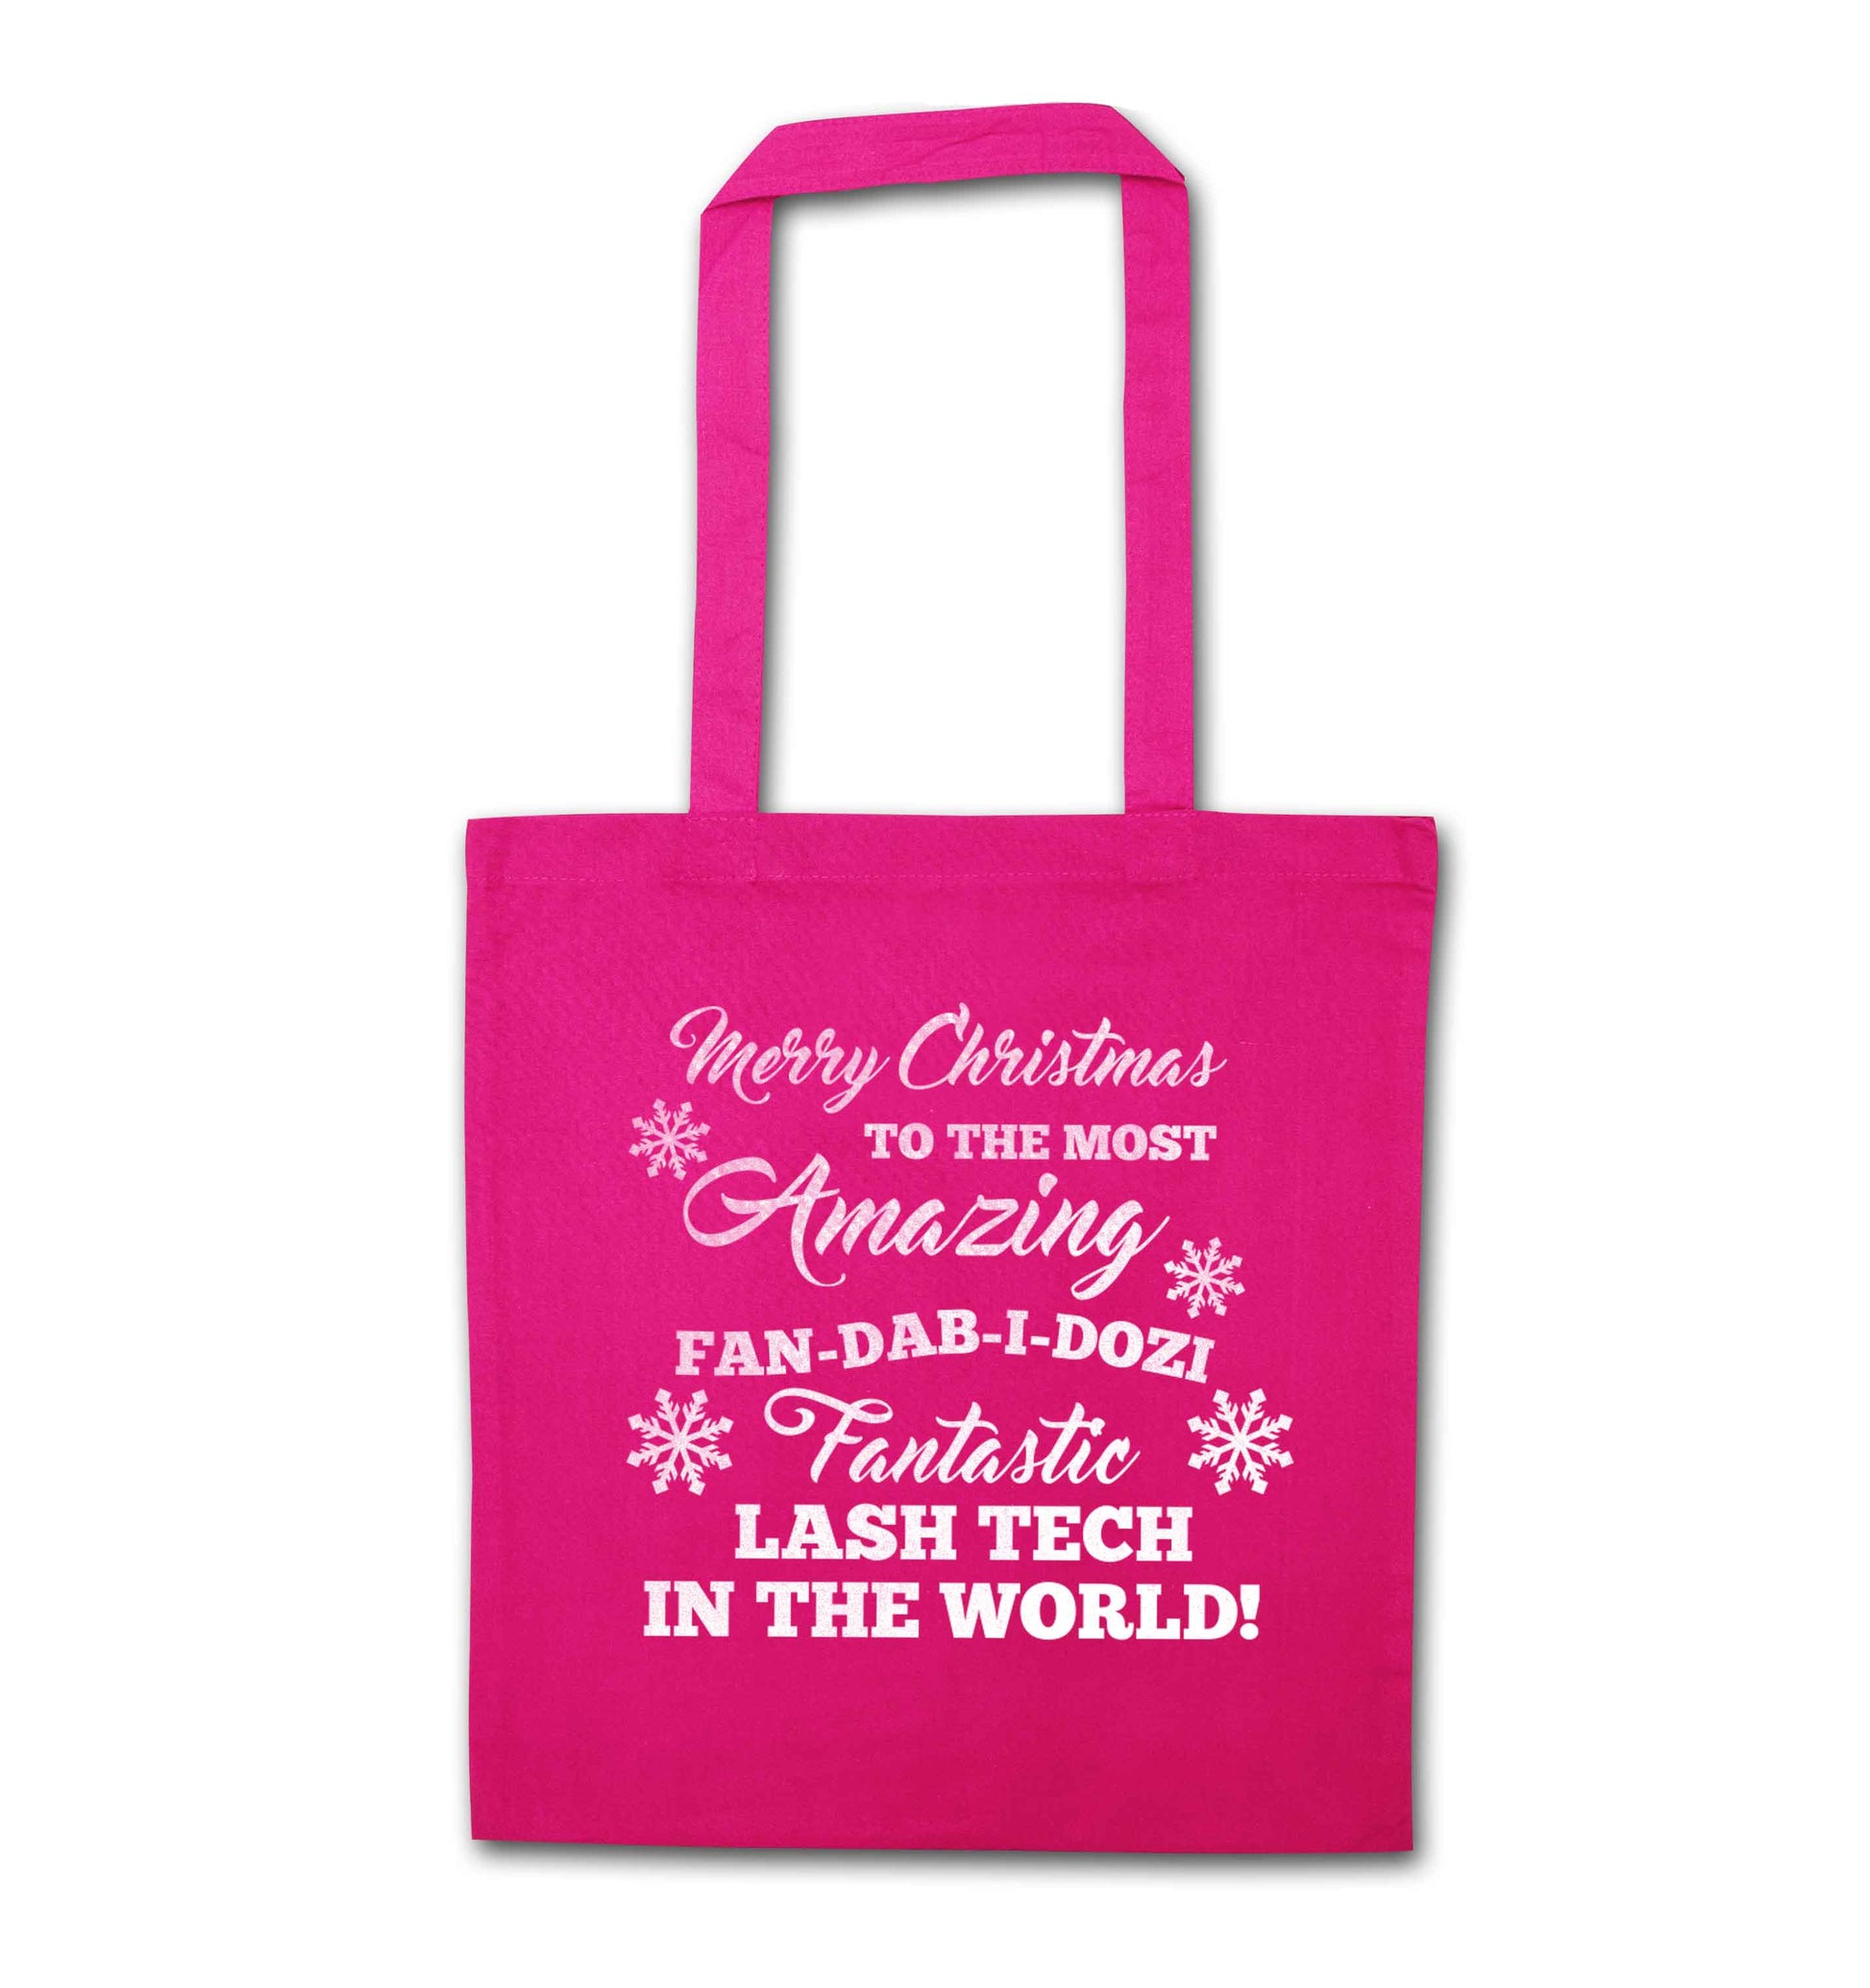 Merry Christmas to the most amazing fan-dab-i-dozi fantasic lash tech in the world pink tote bag